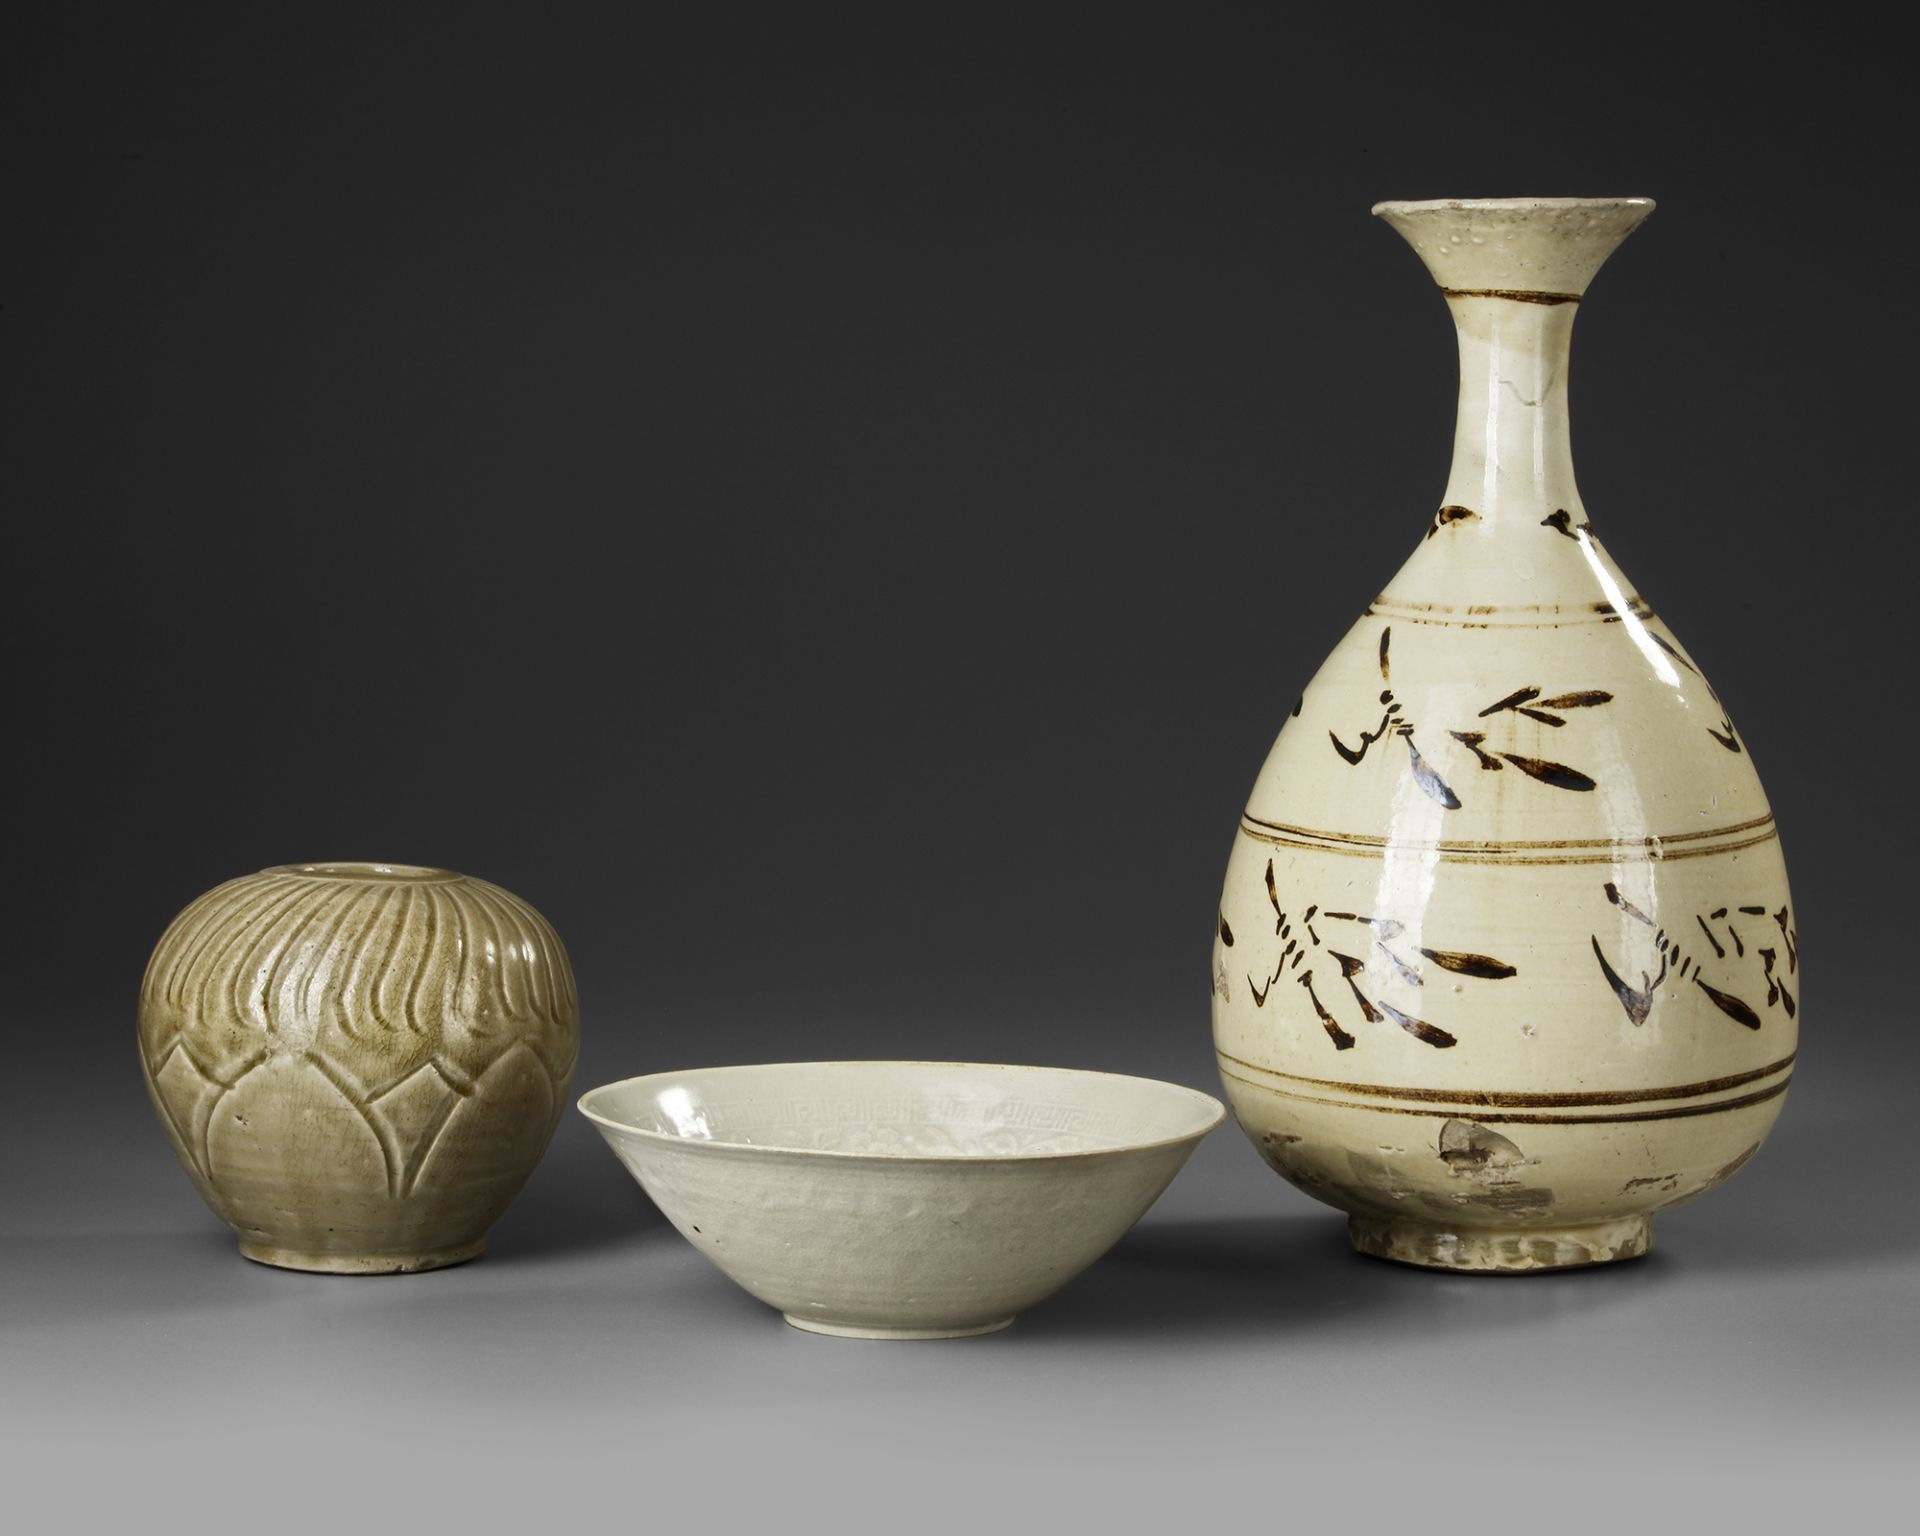 THREE CHINESE WARES IN VARIOUS MATERIALS, FIVE DYNASTIES ( 907-960) /SONG DYNASTY (960-1279) - Bild 2 aus 6